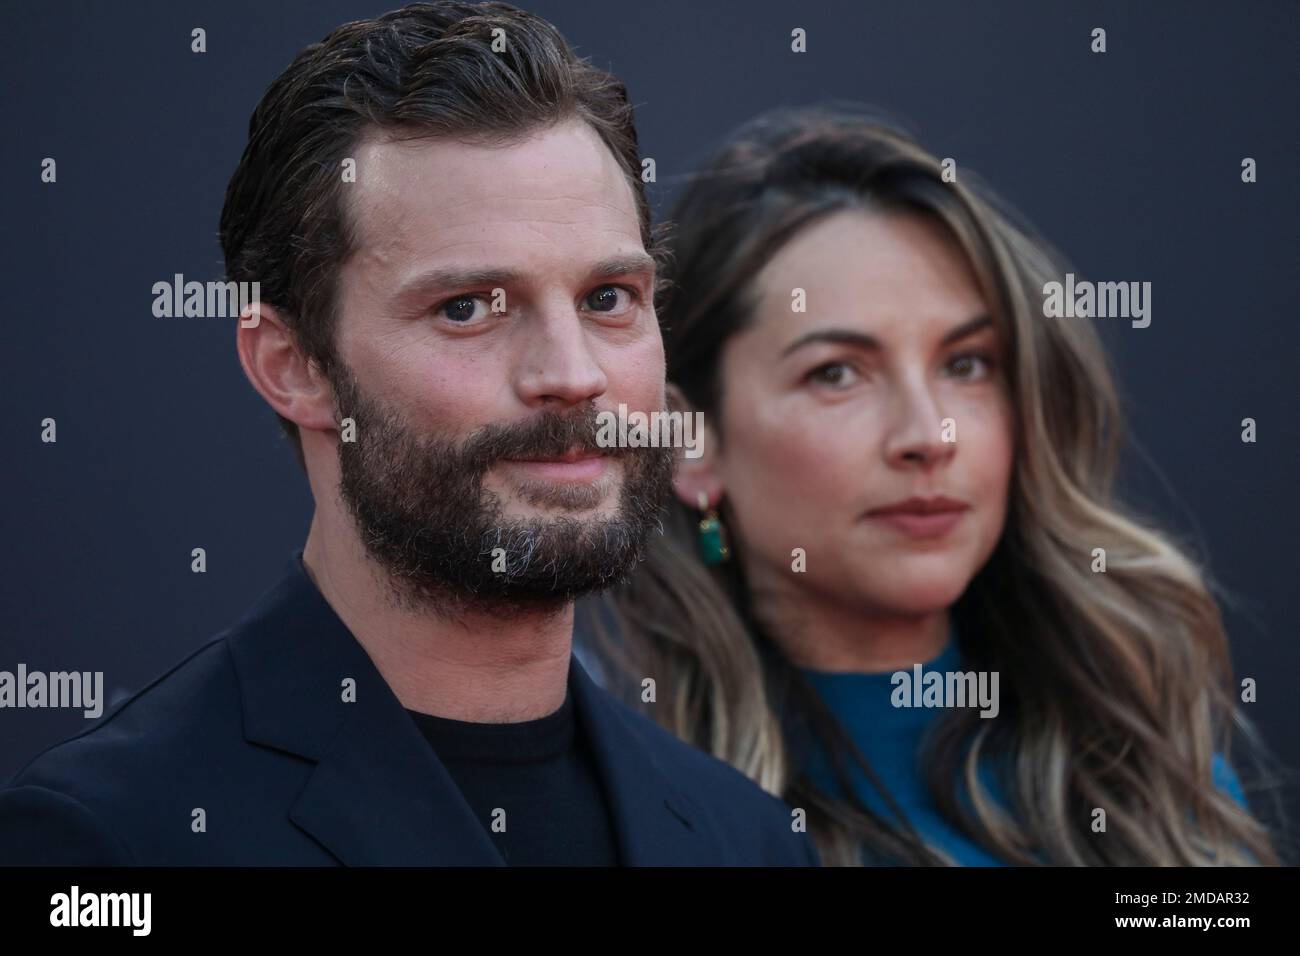 Jamie Dornan, left, and Amelia Warner pose for photographers upon arrival at  the premiere of the film 'Belfast' during the 2021 BFI London Film Festival  in London, Tuesday, Oct. 12, 2021. (Photo